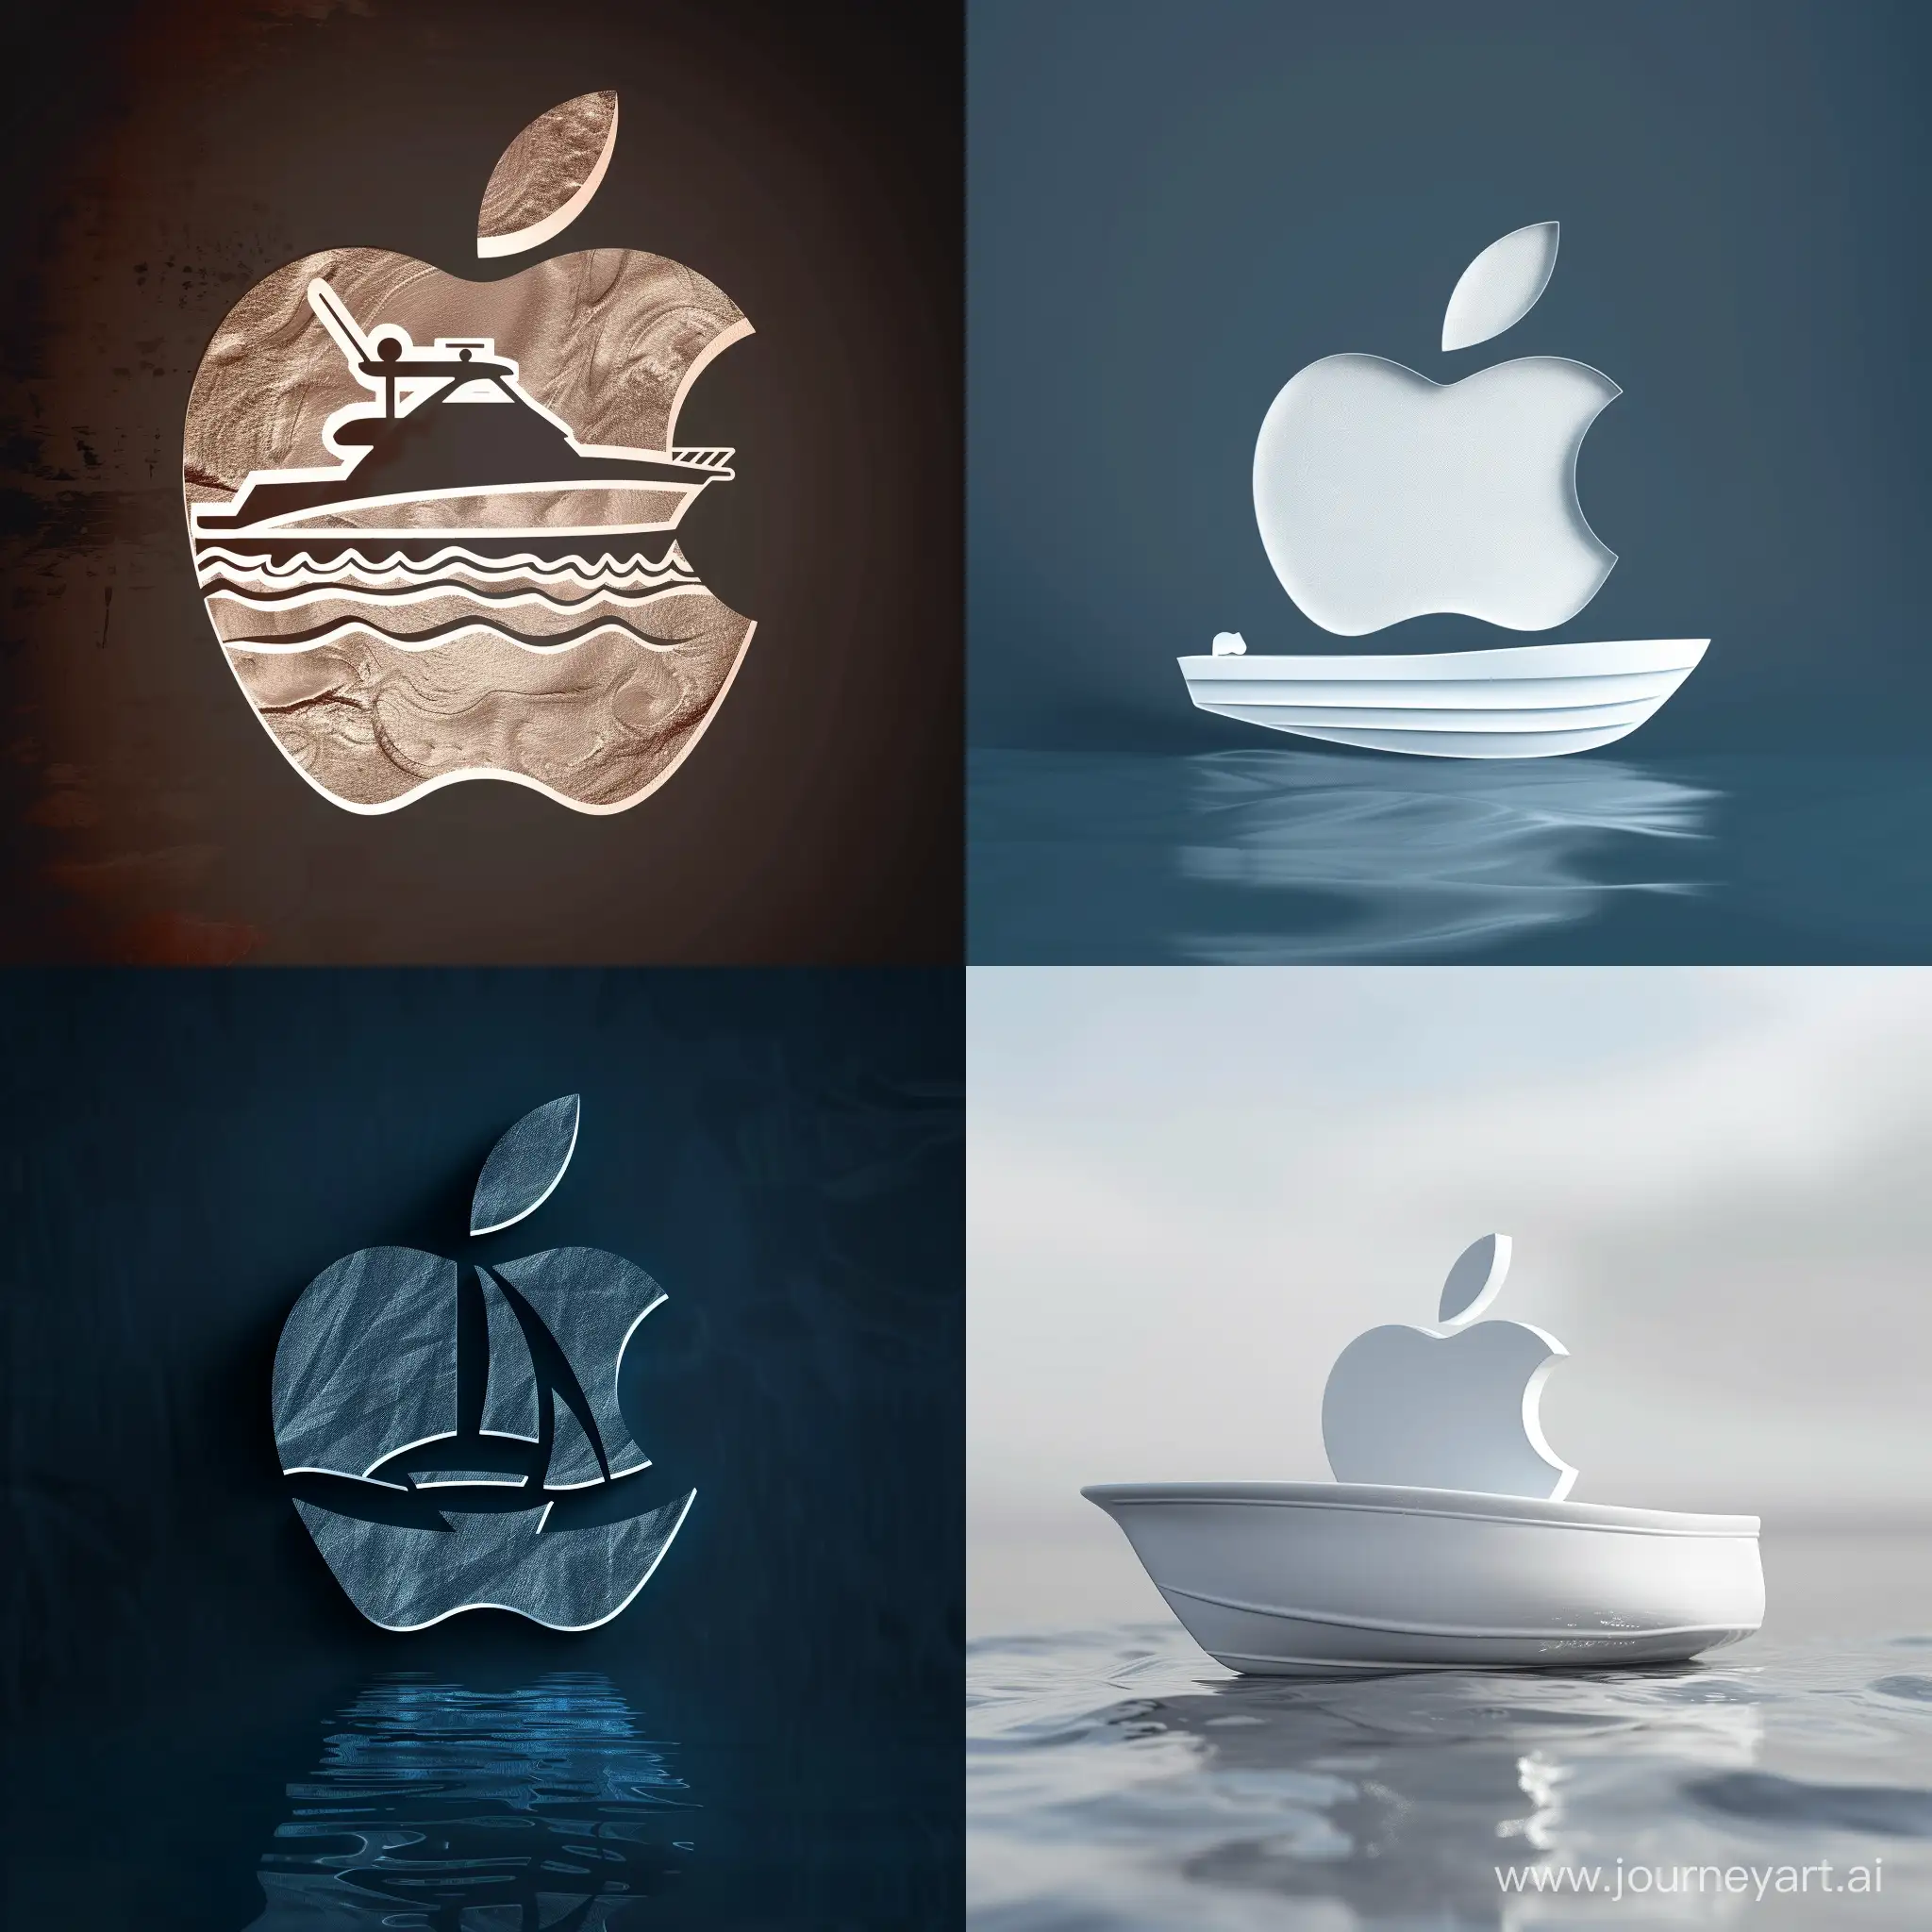 A blend of a boat logo and apple logo 